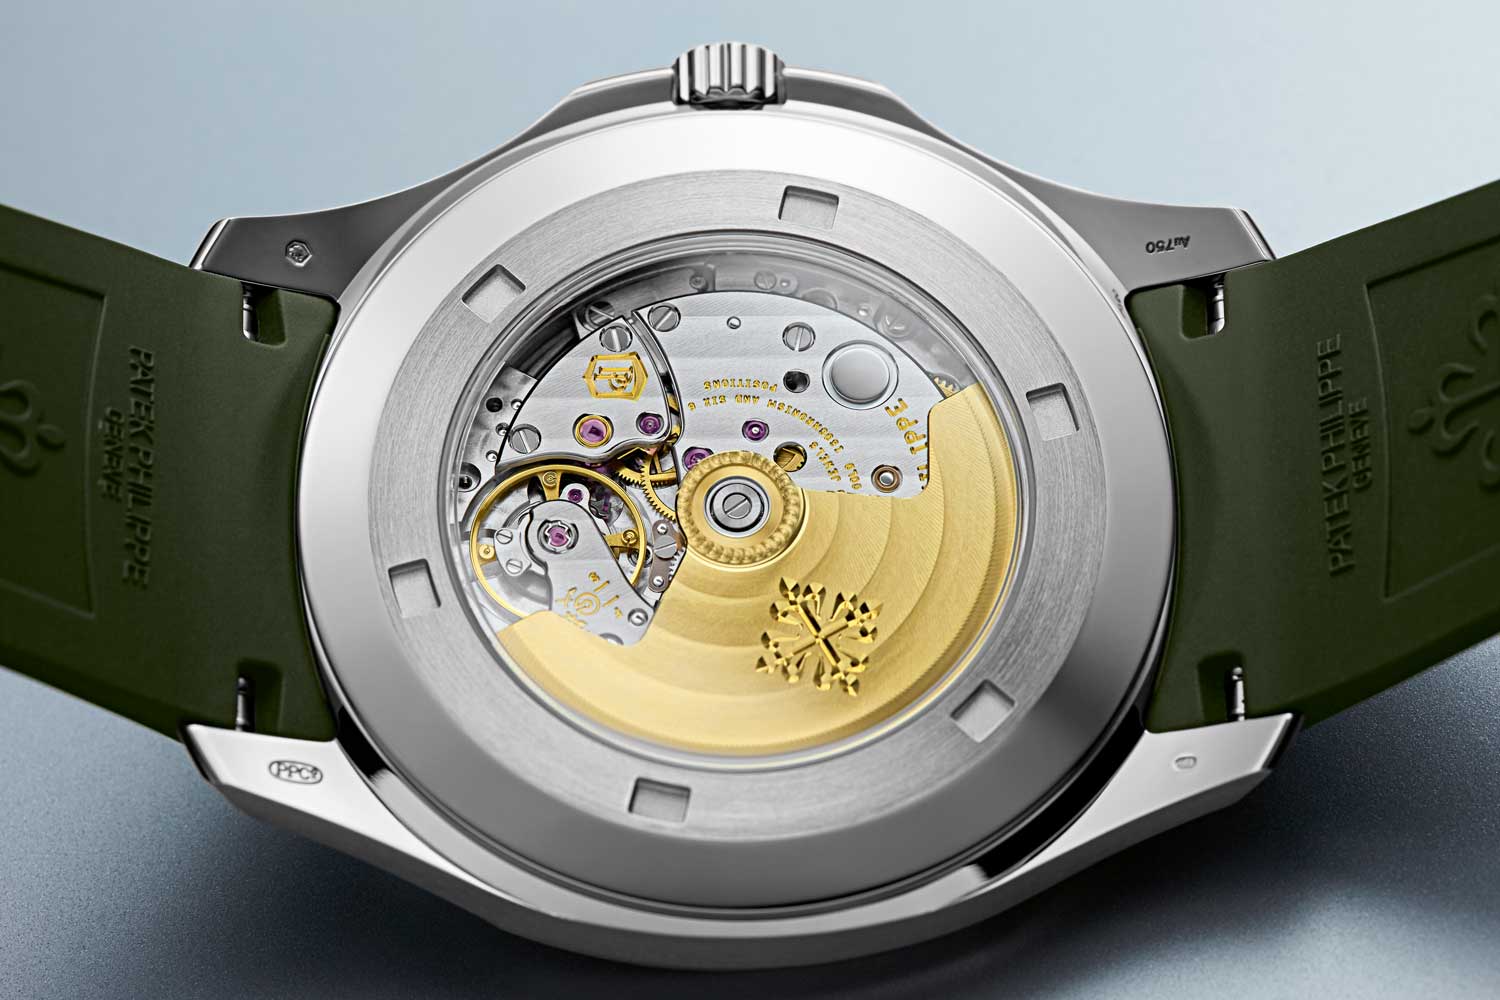 The watch is powered by the caliber 26-330 SC